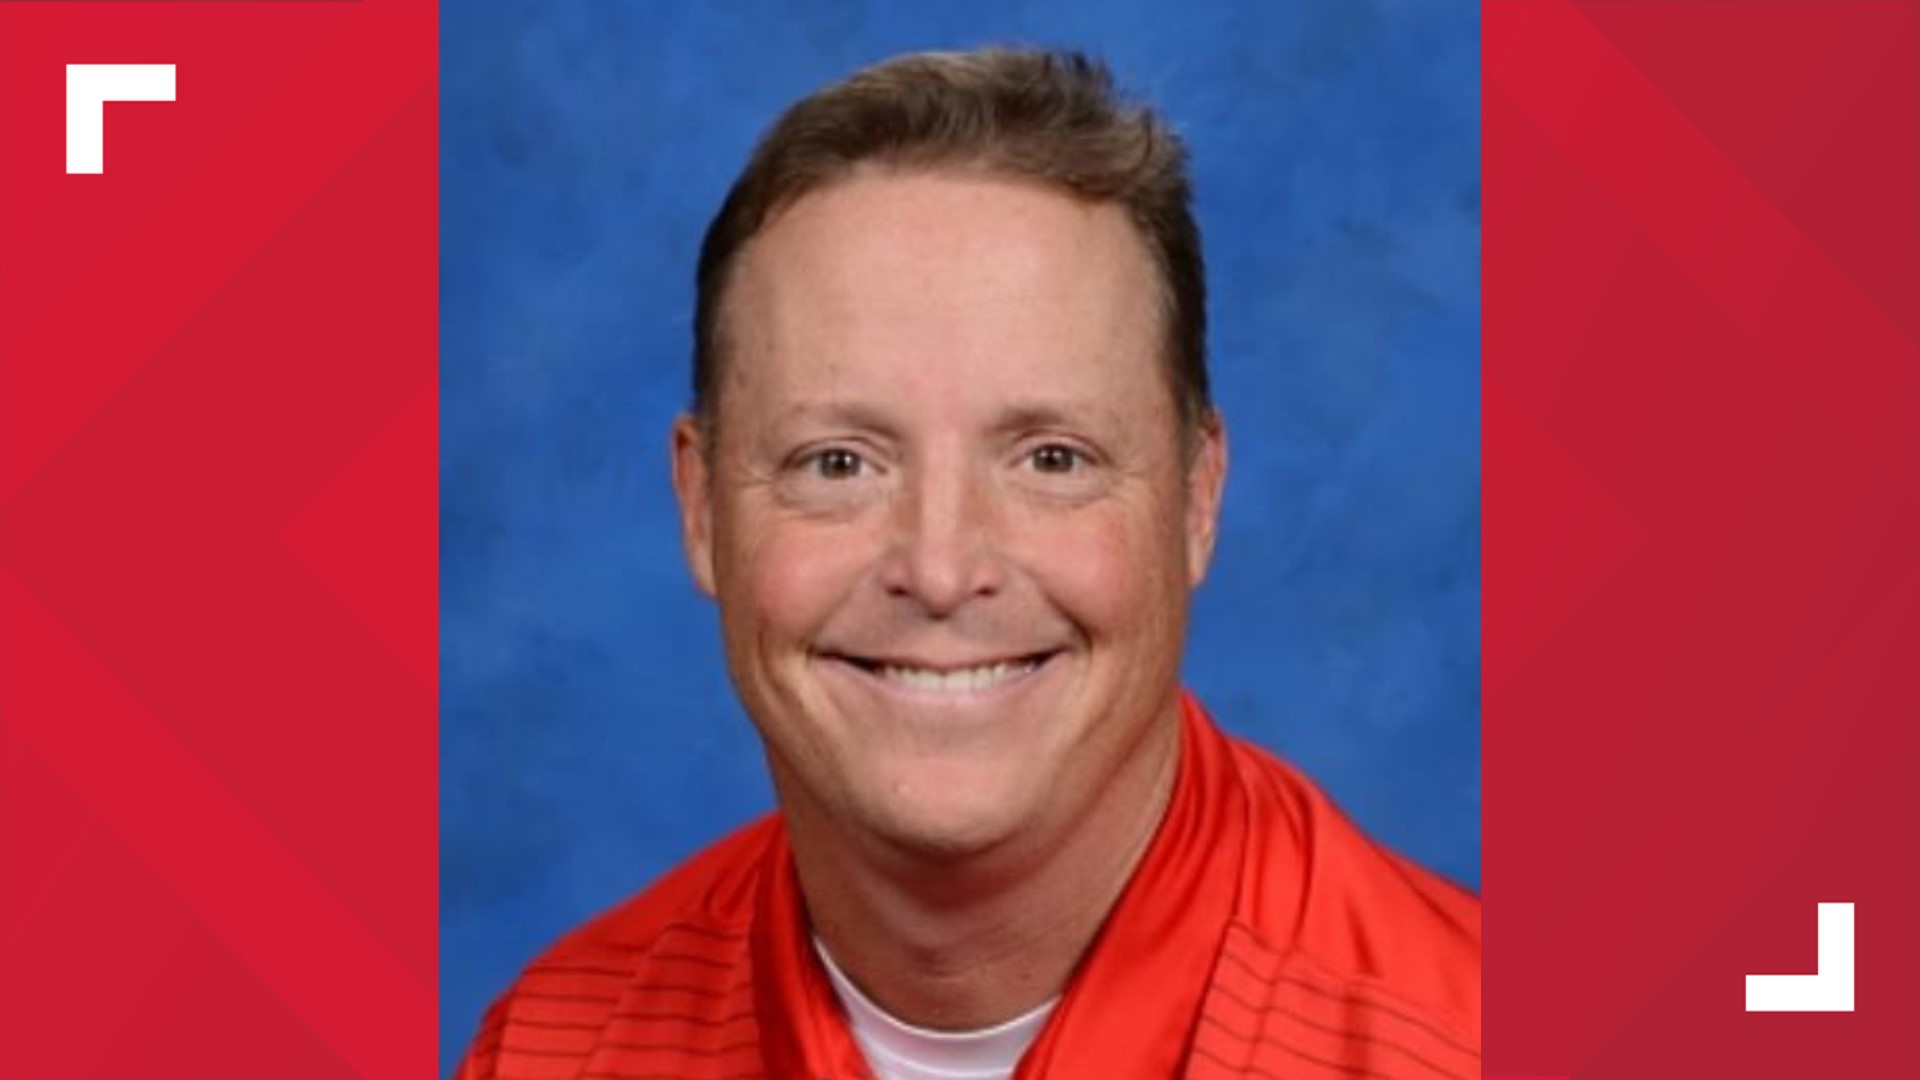 Pending board approval, the district will name Brett Sniffin as the head football coach at Belton High School.